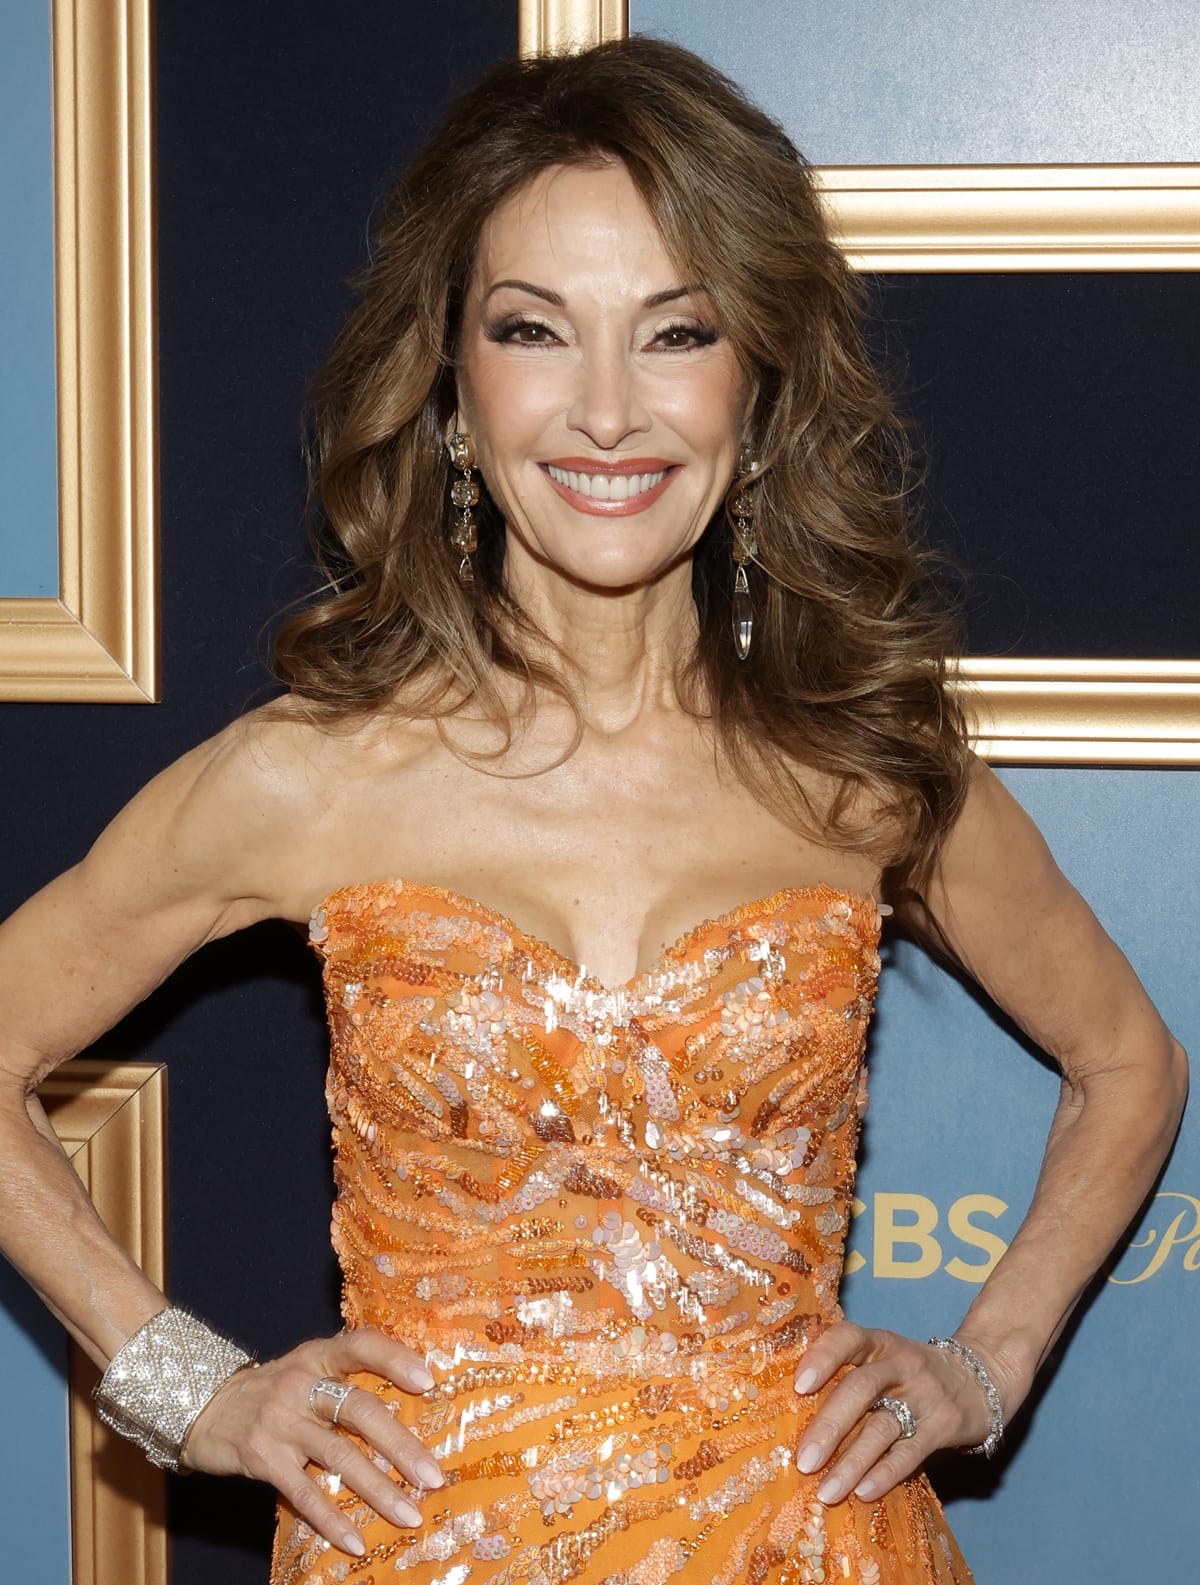 A triumphant moment for Susan Lucci as she receives the Lifetime Achievement Honor at the 2023 Daytime Emmys, celebrating her iconic role as Erica Kane